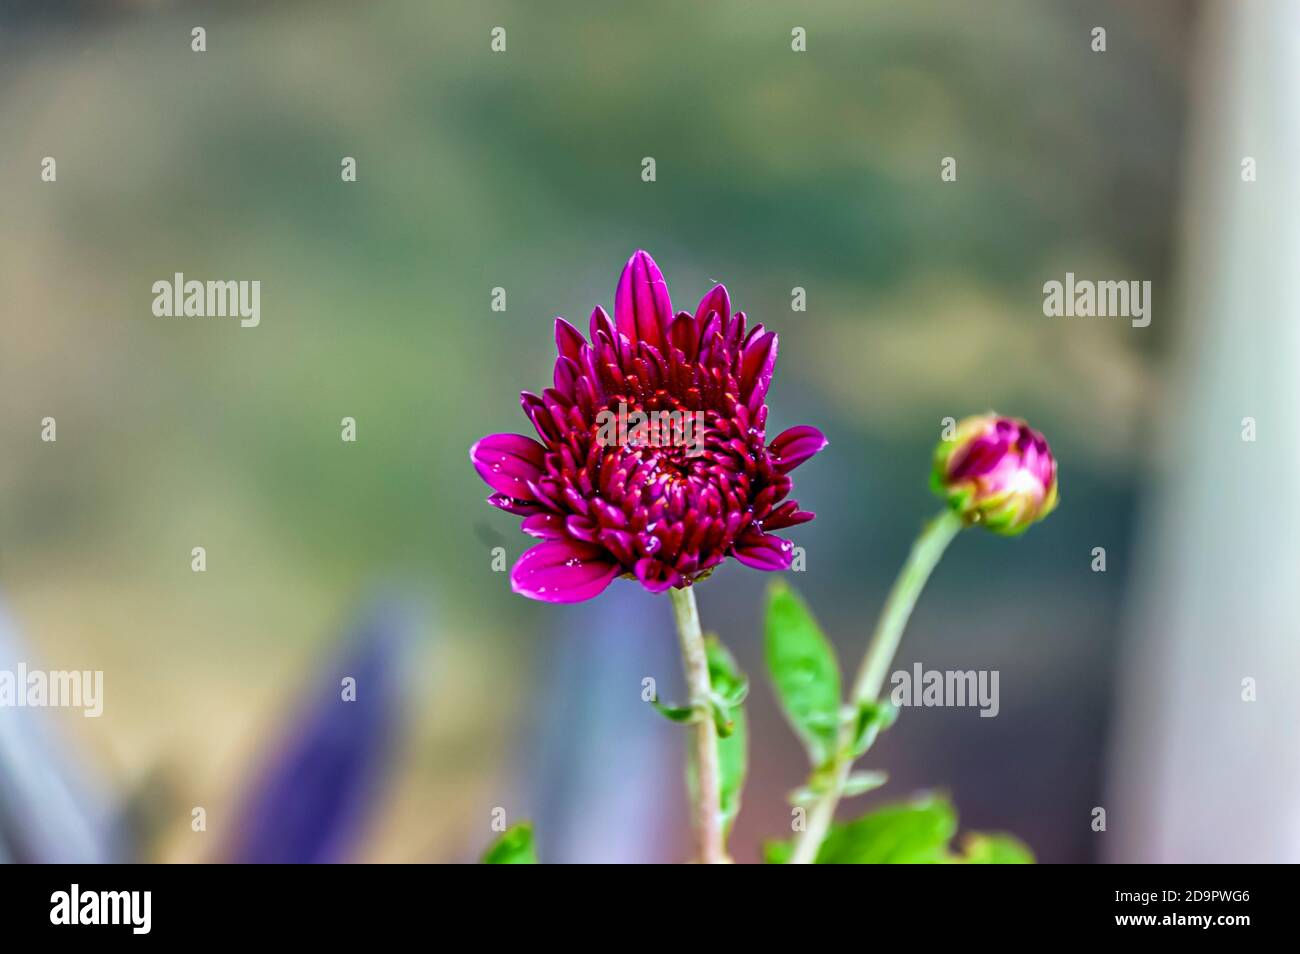 A close up of a partially bloomed dahlia flower in a home garden. Stock Photo